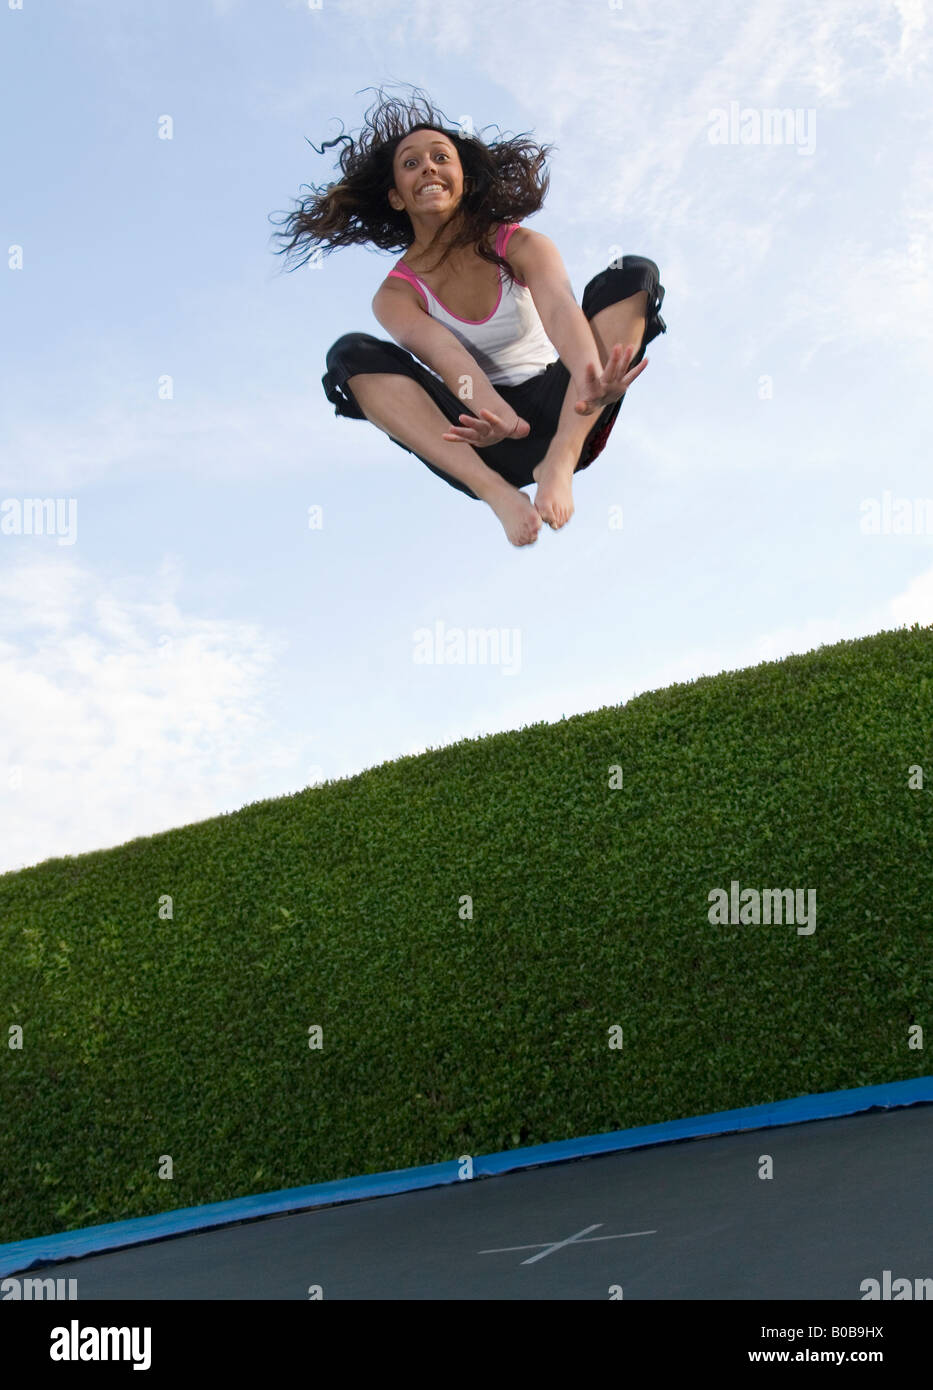 A  teen teenage girl age 16 years old jumping on a trampoline, UK Stock Photo